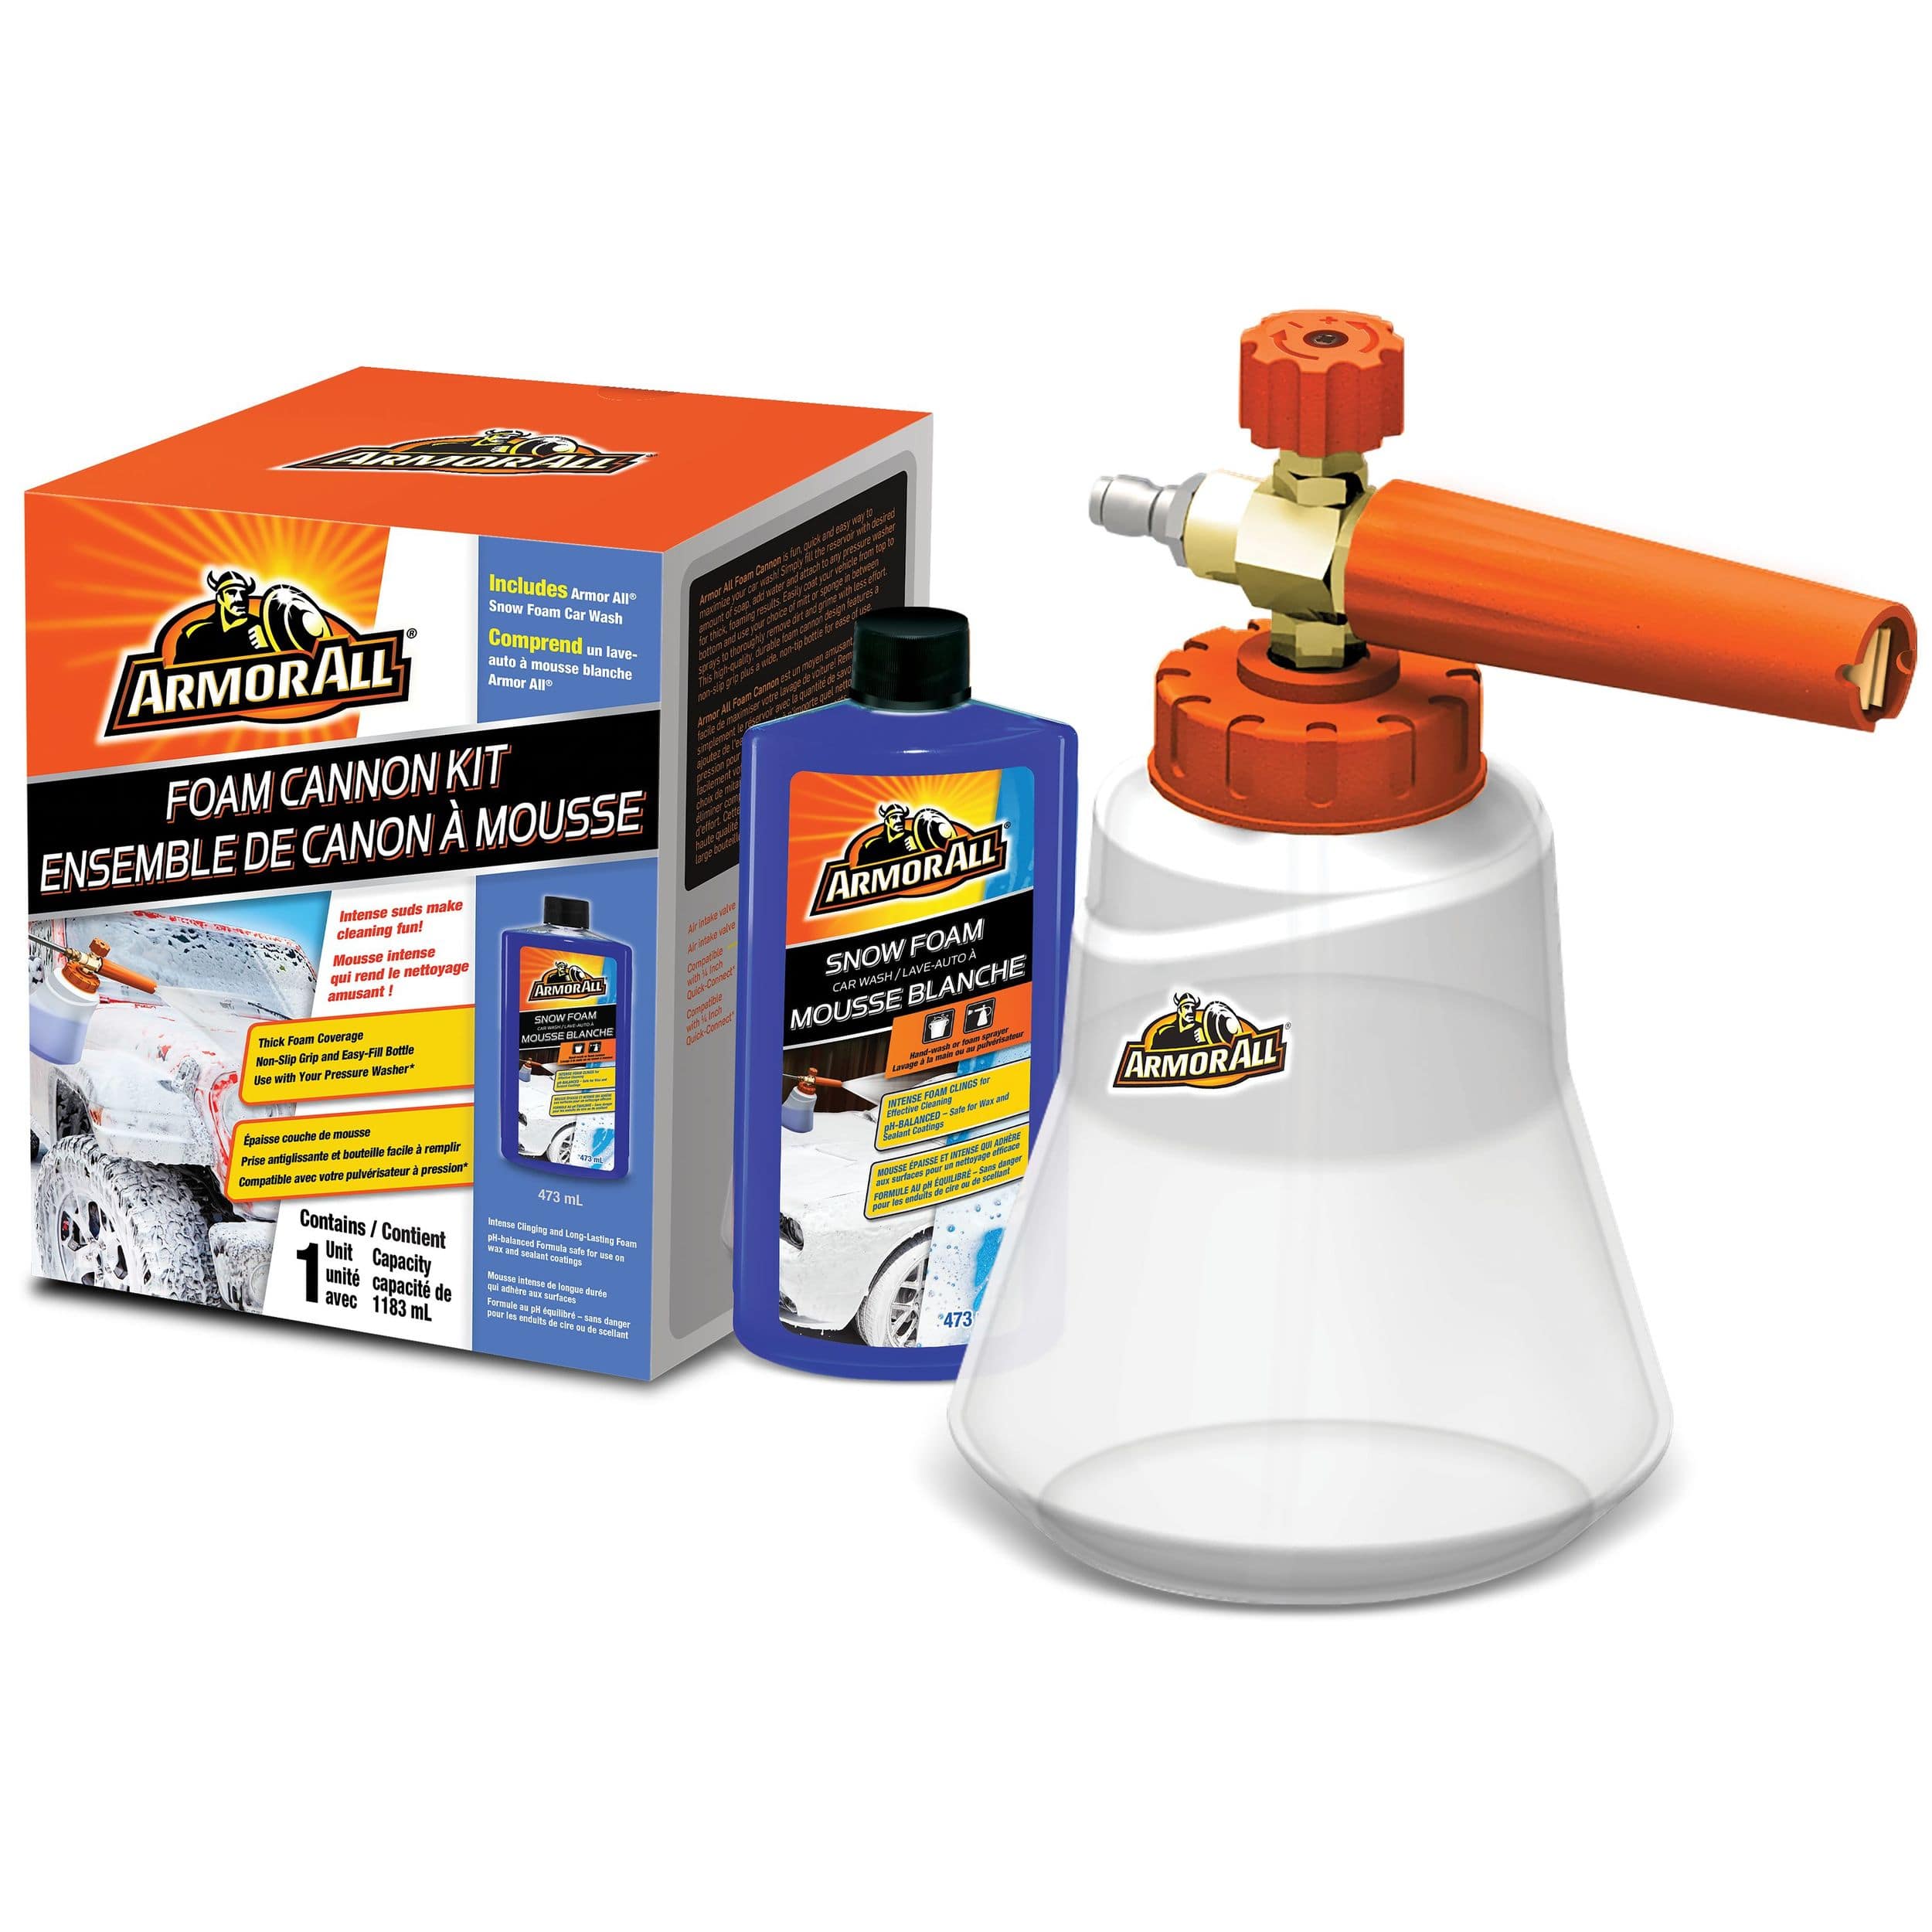 Armor All 2-in-1 Foam Cannon Kit E303511700 - The Home Depot